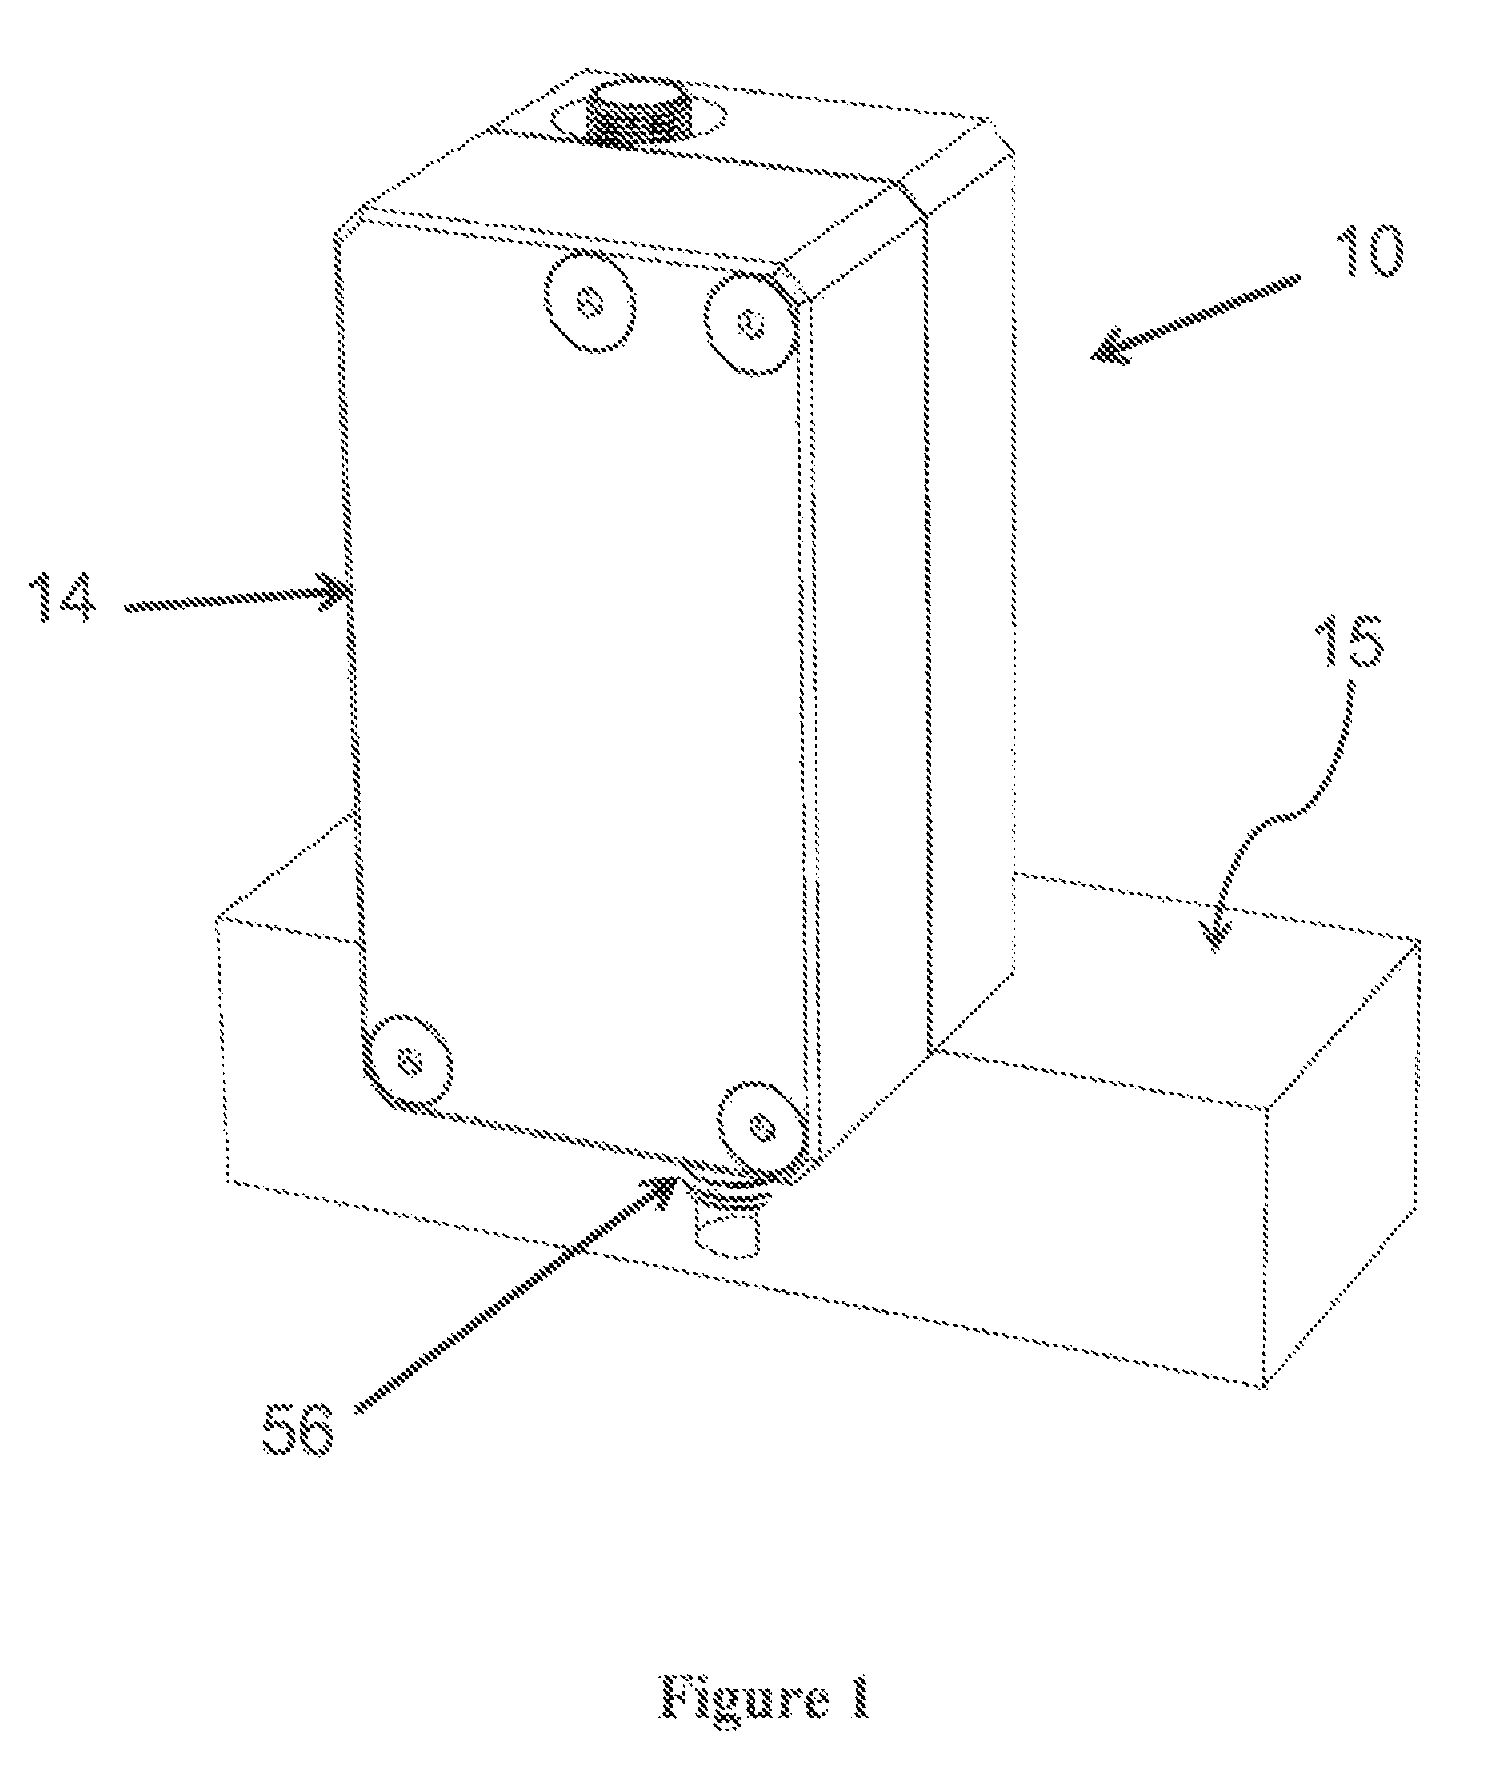 Monolithic energy harvesting system, apparatus, and method